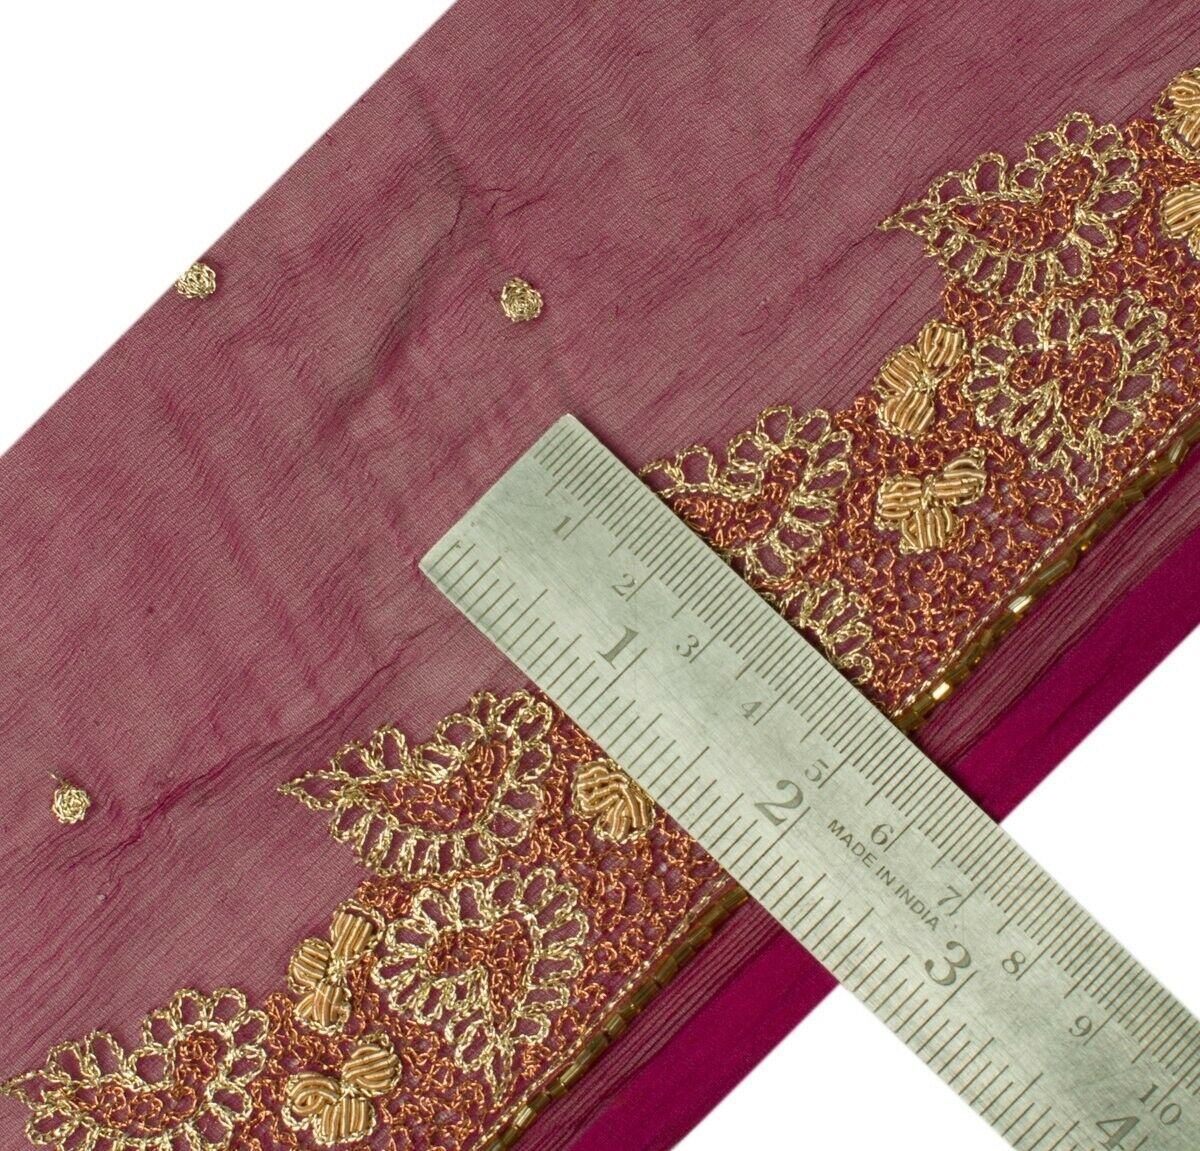 Vintage Sari Border Indian Craft Sewing Trim Hand Beaded Embroidered Purple Lace